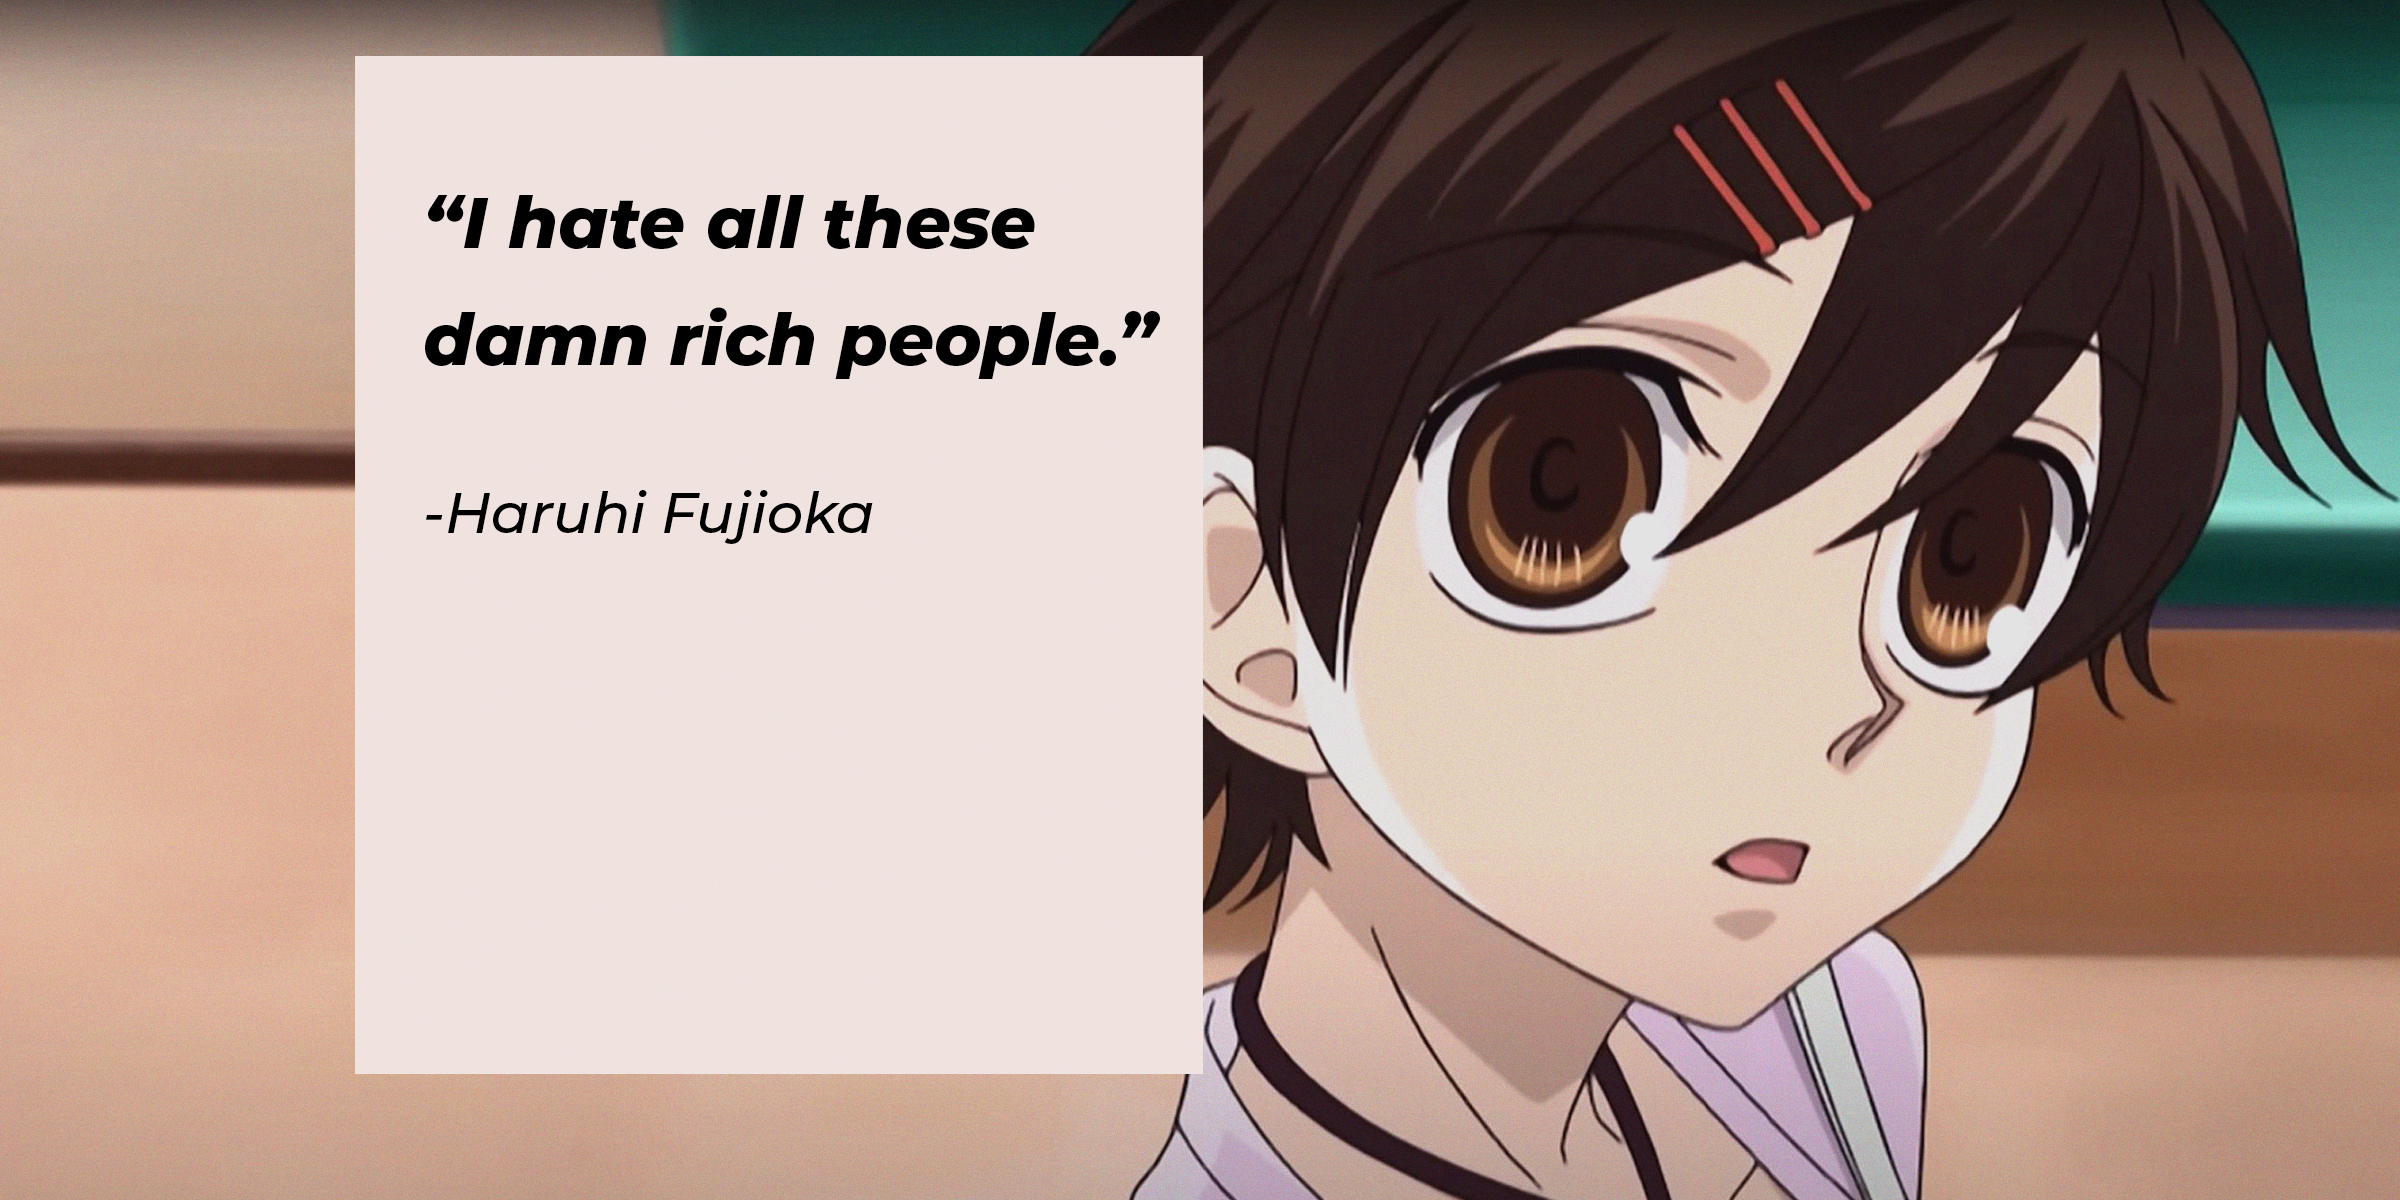 A picture of the anime character Haruhi Fujioka with a quote by her that reads, “I hate all these damn rich people.” | Source: facebook.com/theouranhostclub